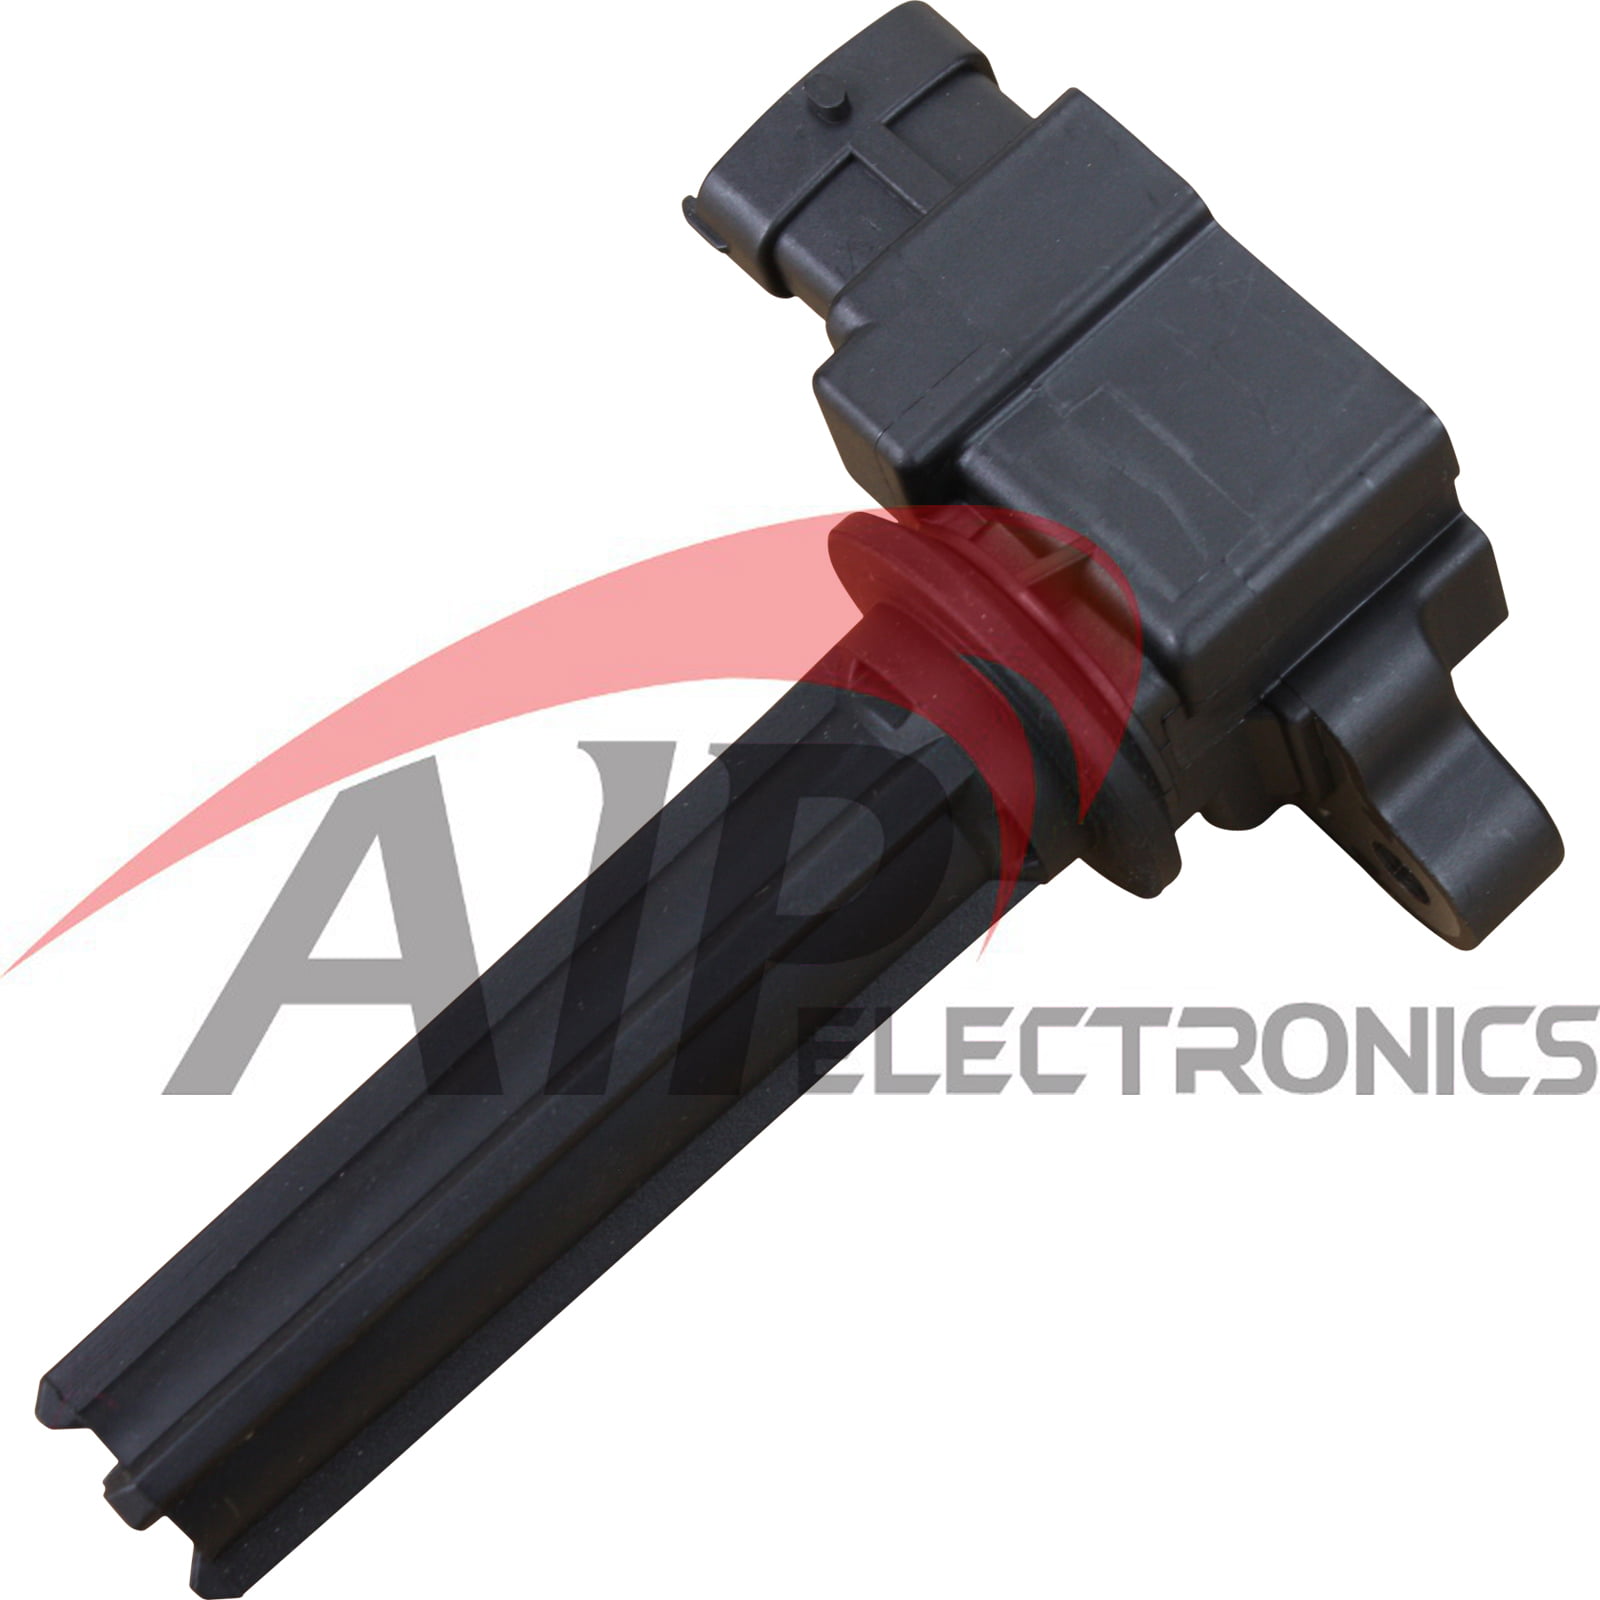 New Ignition Coil for 1994-2000 Saab 900 9-3 2.3L 2.0L 30584237 5171111 3084237